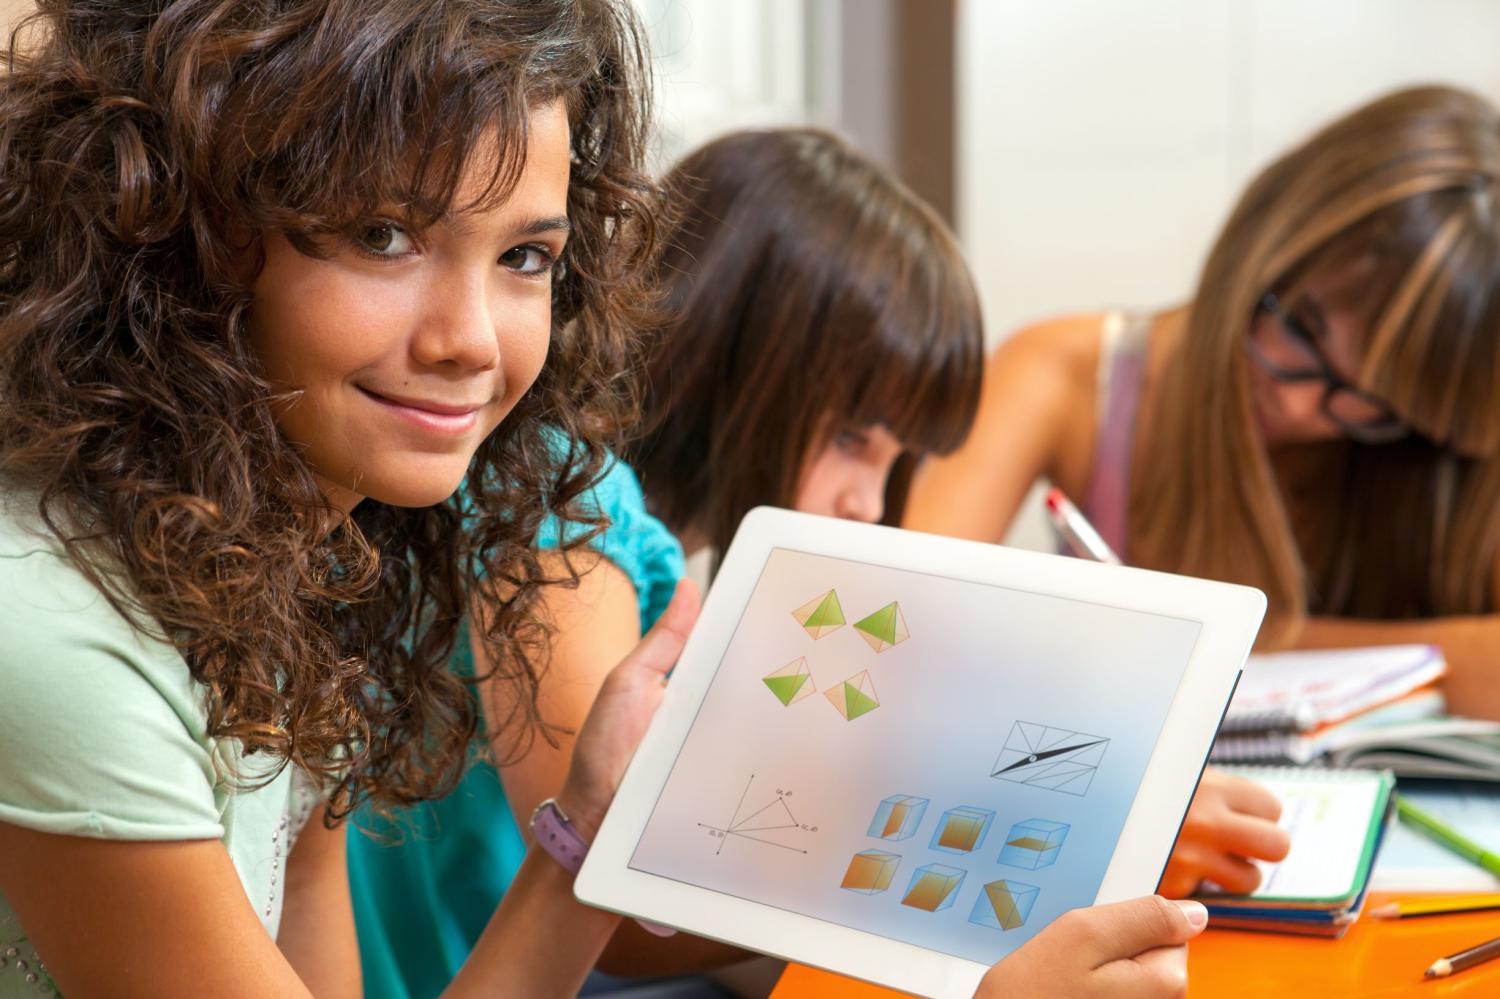 A female student learns with an educational app.